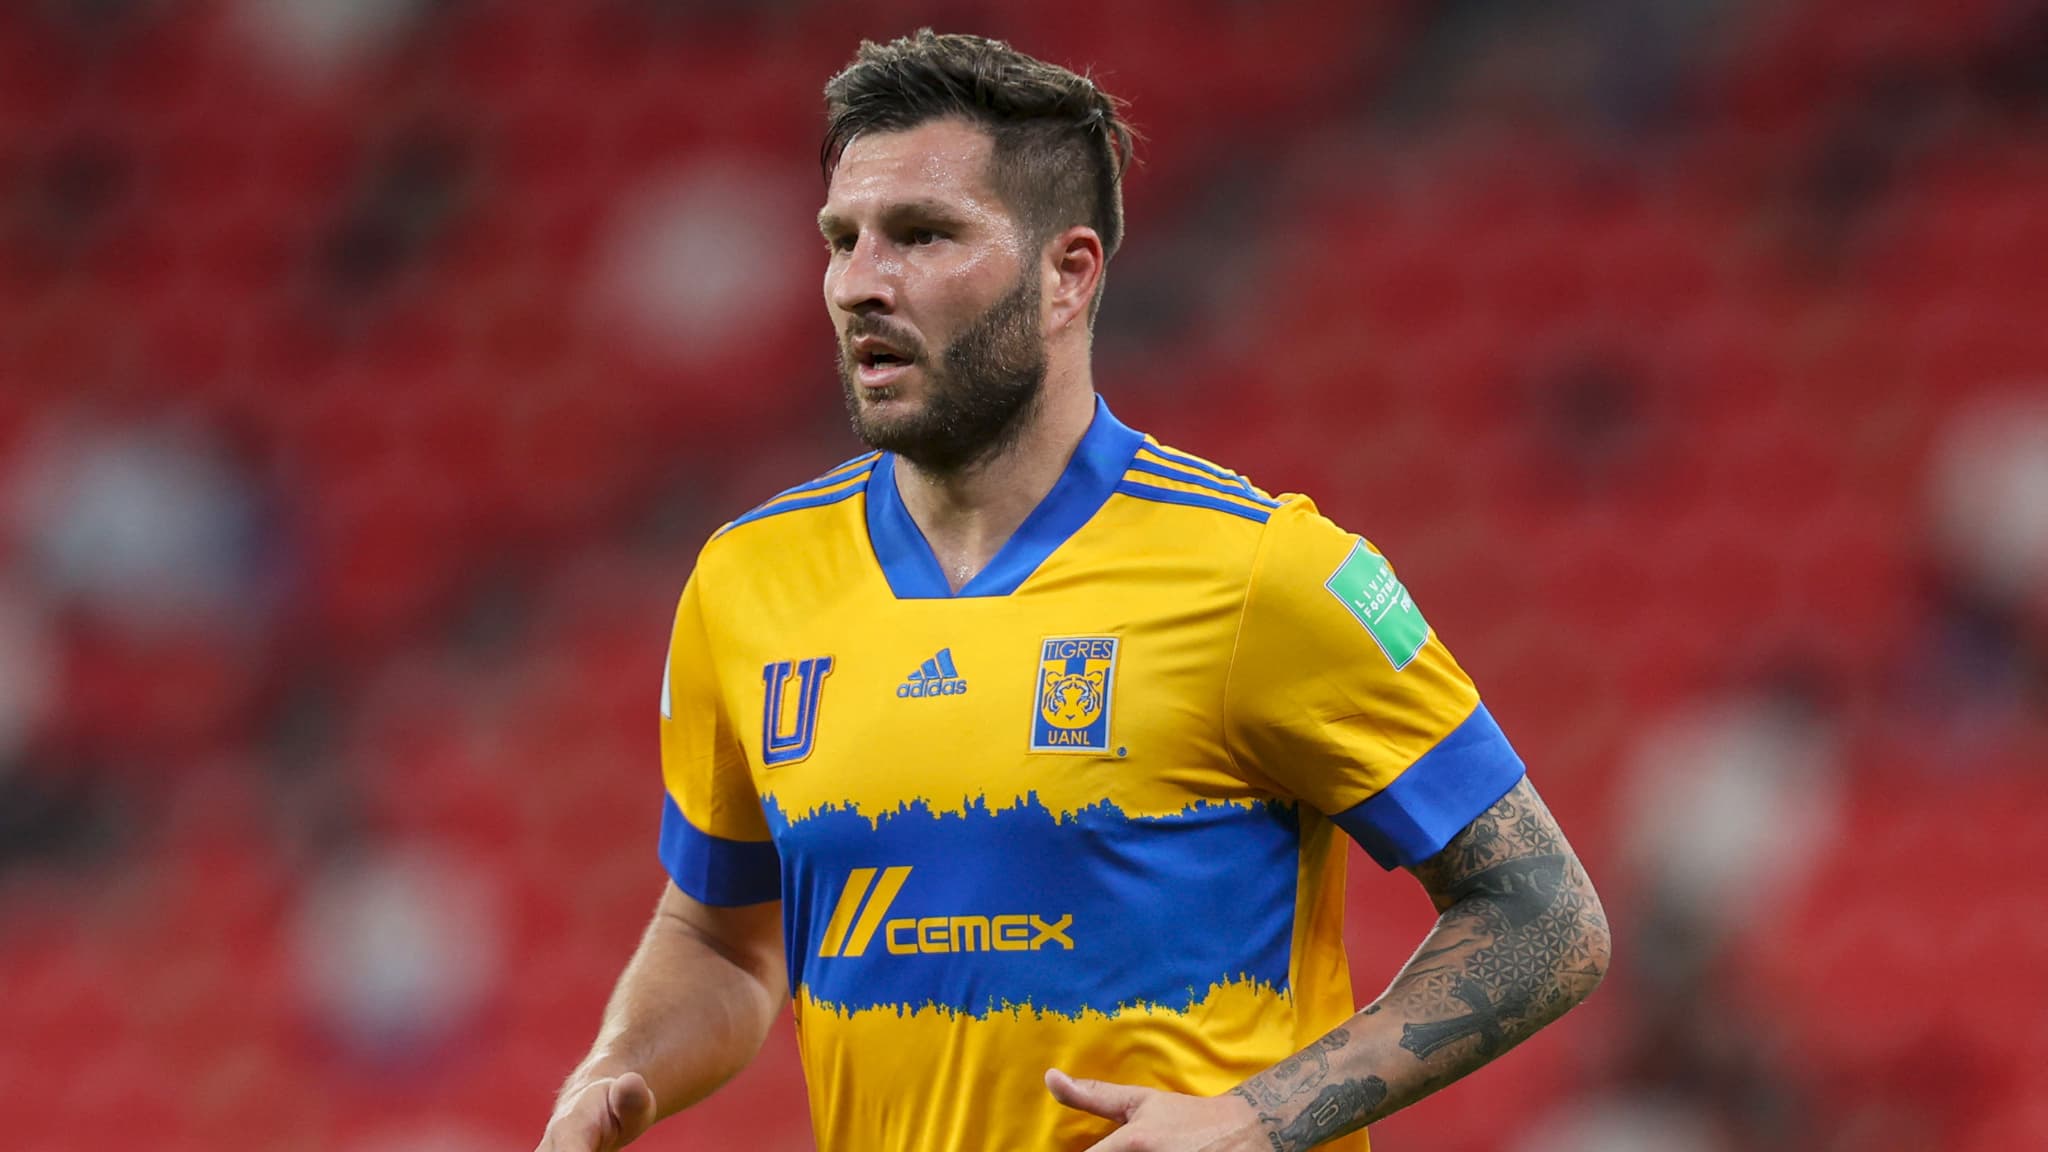 France team: Gignac could play in the Tokyo Olympics - The Indian Paper